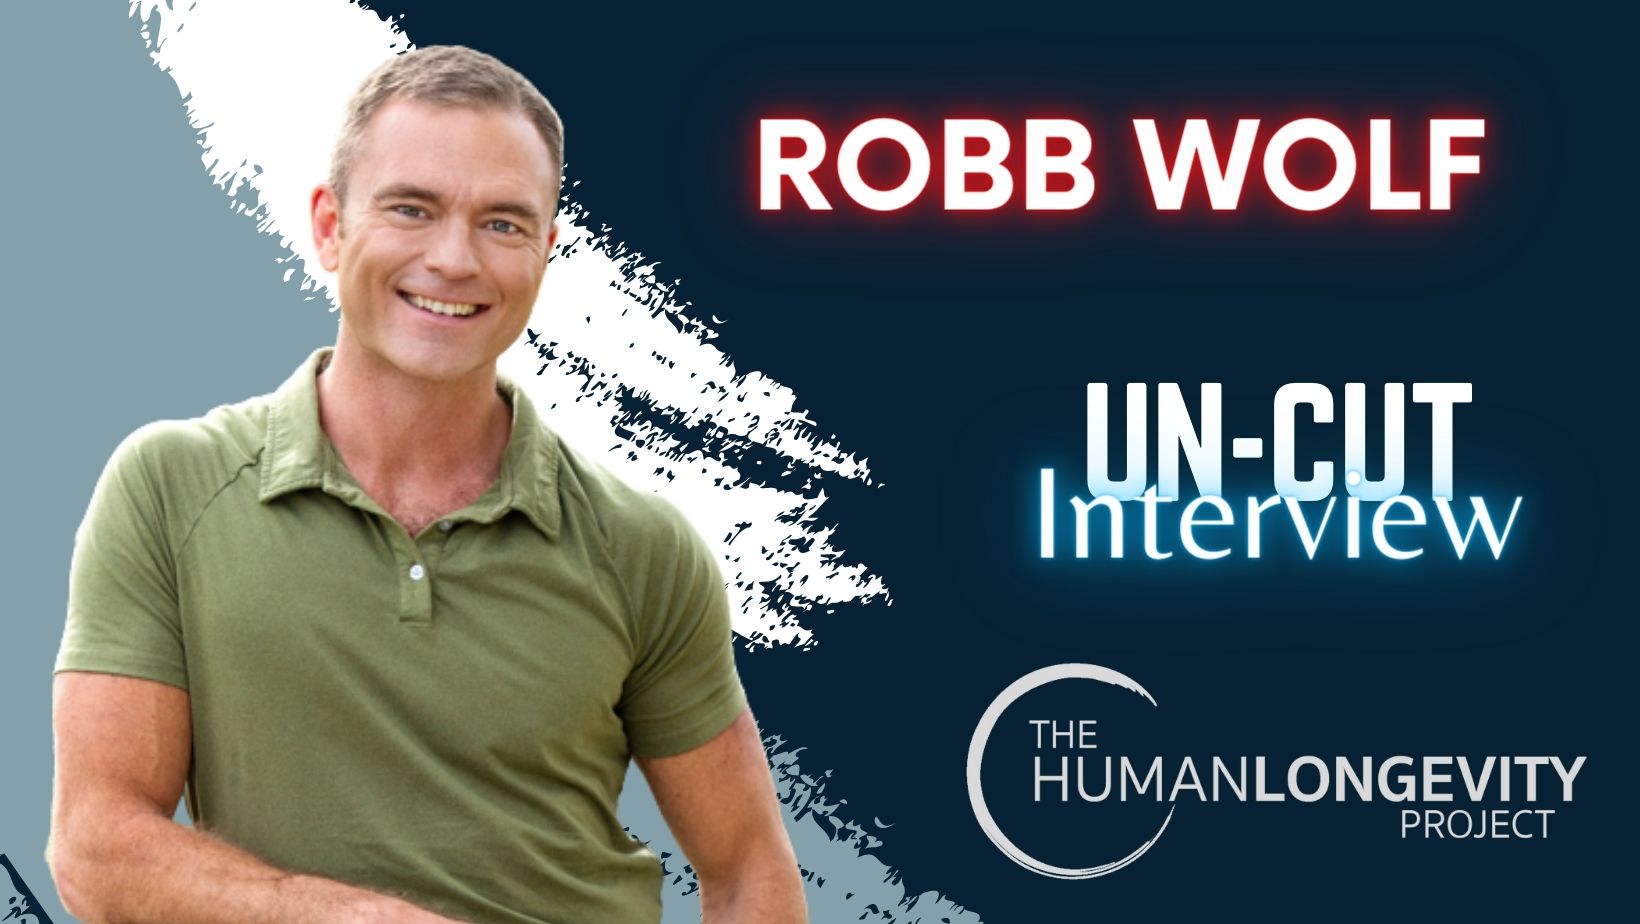 Human Longevity Project Uncut Interview With Robb Wolf